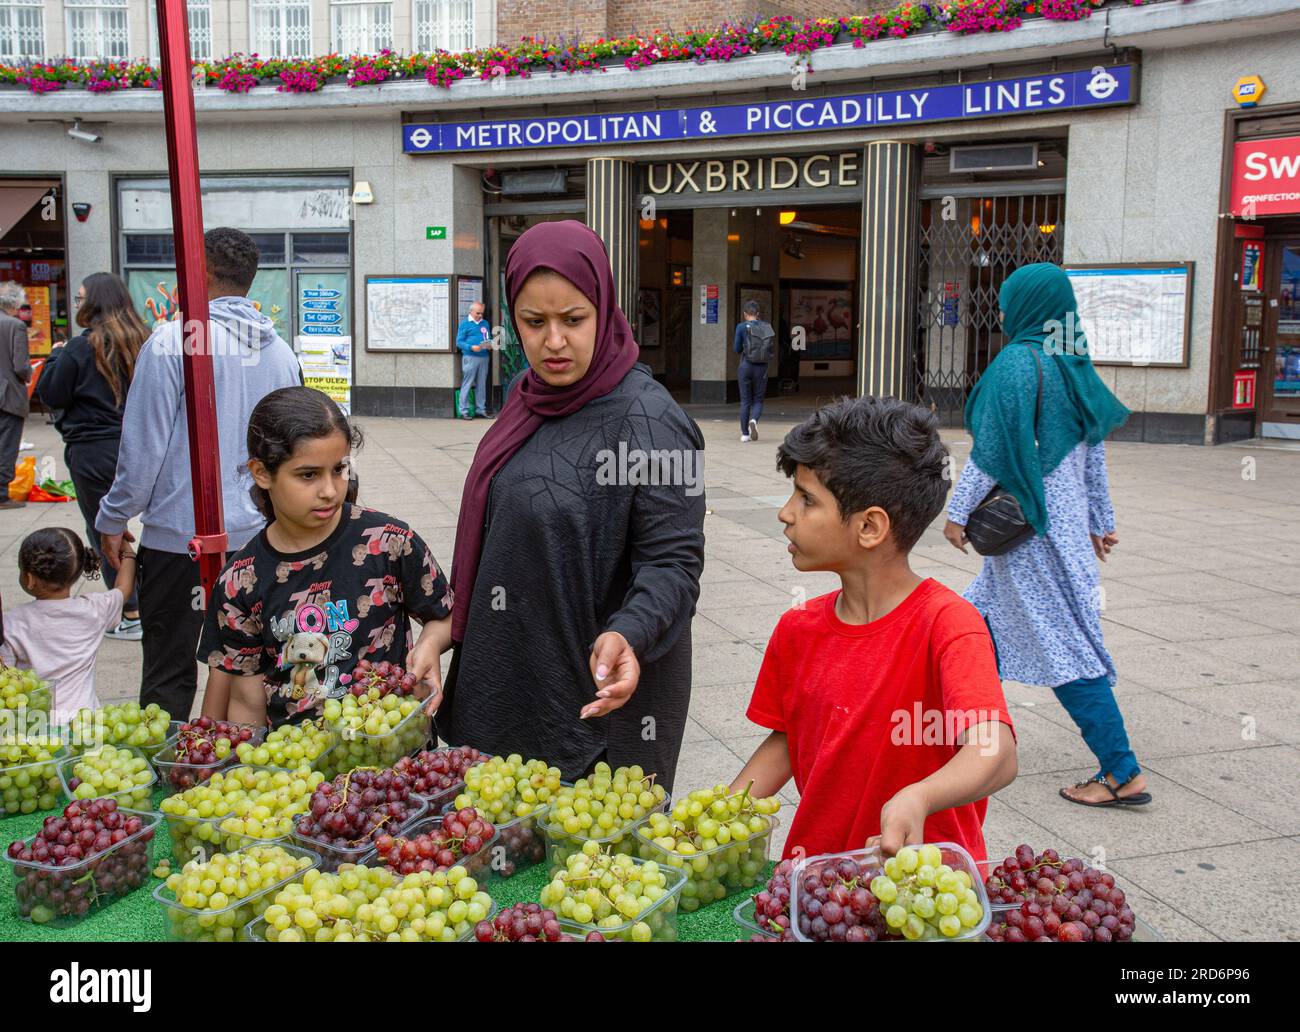 Uxbridge, UK. 18th July, 2023. Two days before the political by-election, family  shop for fruit and veg outside Uxbridge tube station, on 18th July 2023, in London, England. The Uxbridge and South Ruislip constituency is one of three local by-elections being held on the same day but Uxbridge was represented in parliament by former Conservative Prime Minister, Boris Johnson for eight years before resigning as an MP. It will be contested by 17 candidates on 20th July. Credit: horst friedrichs/Alamy Live News Stock Photo